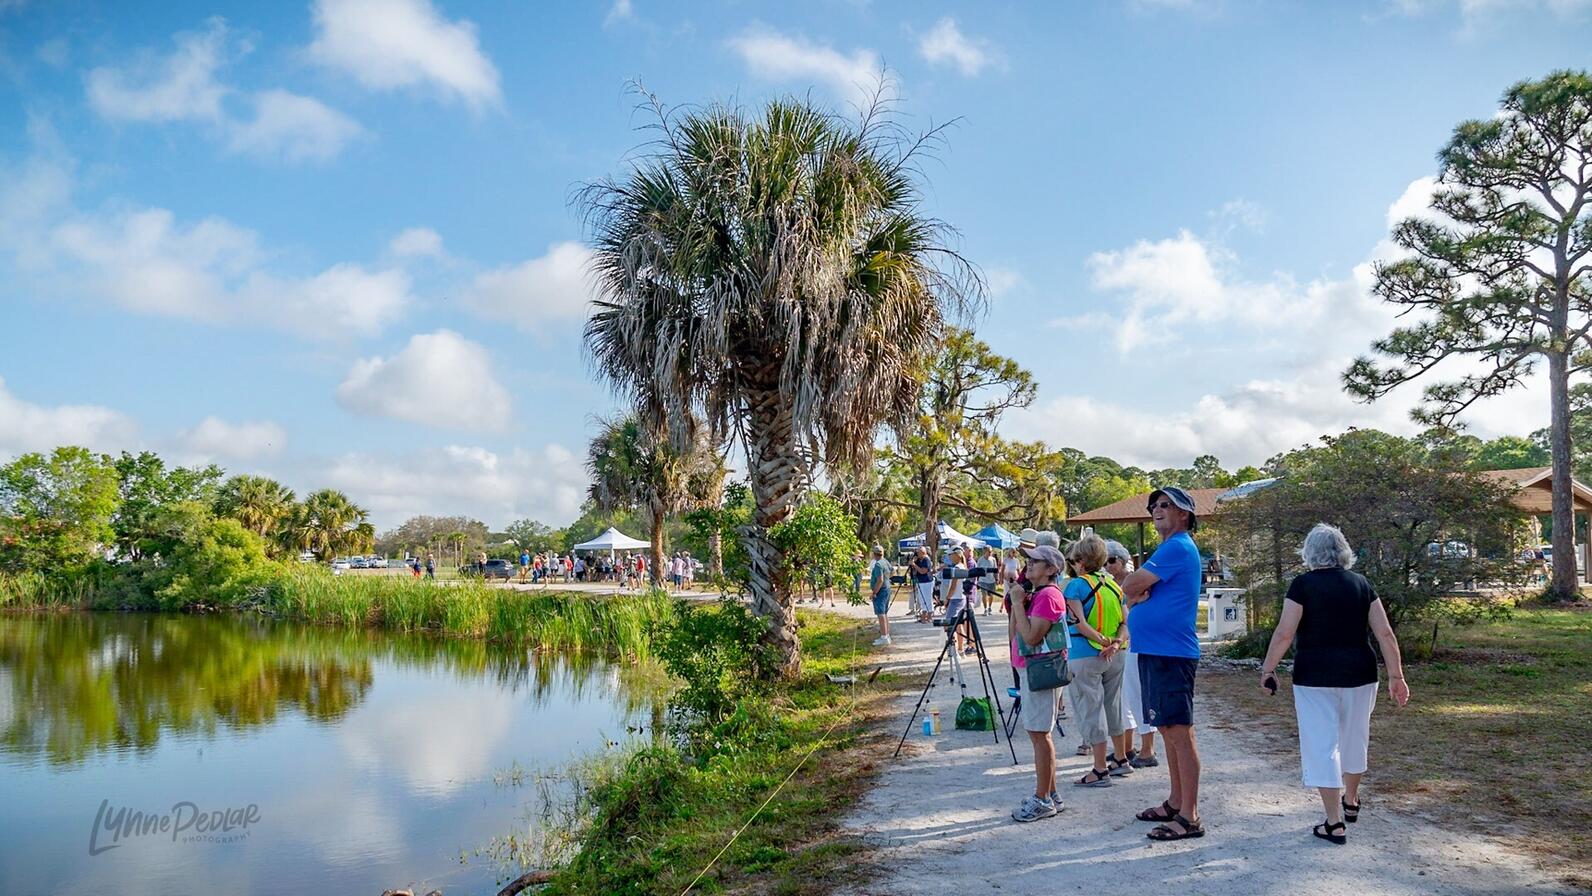 Dozens of birders gather around the shore of a lake during the Rookery Day event.